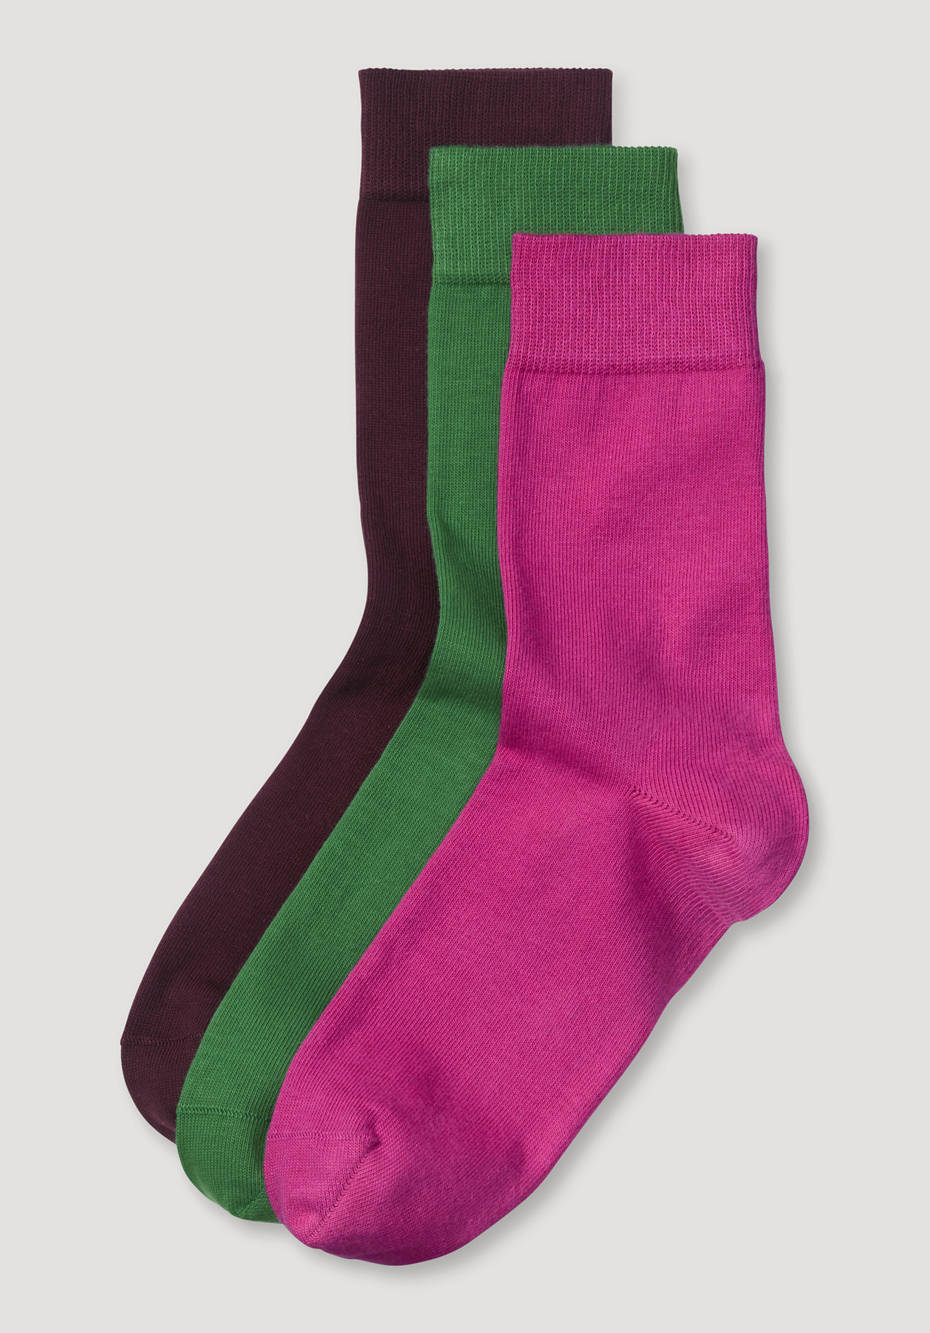 Women's socks in a set of 3 made from organic cotton